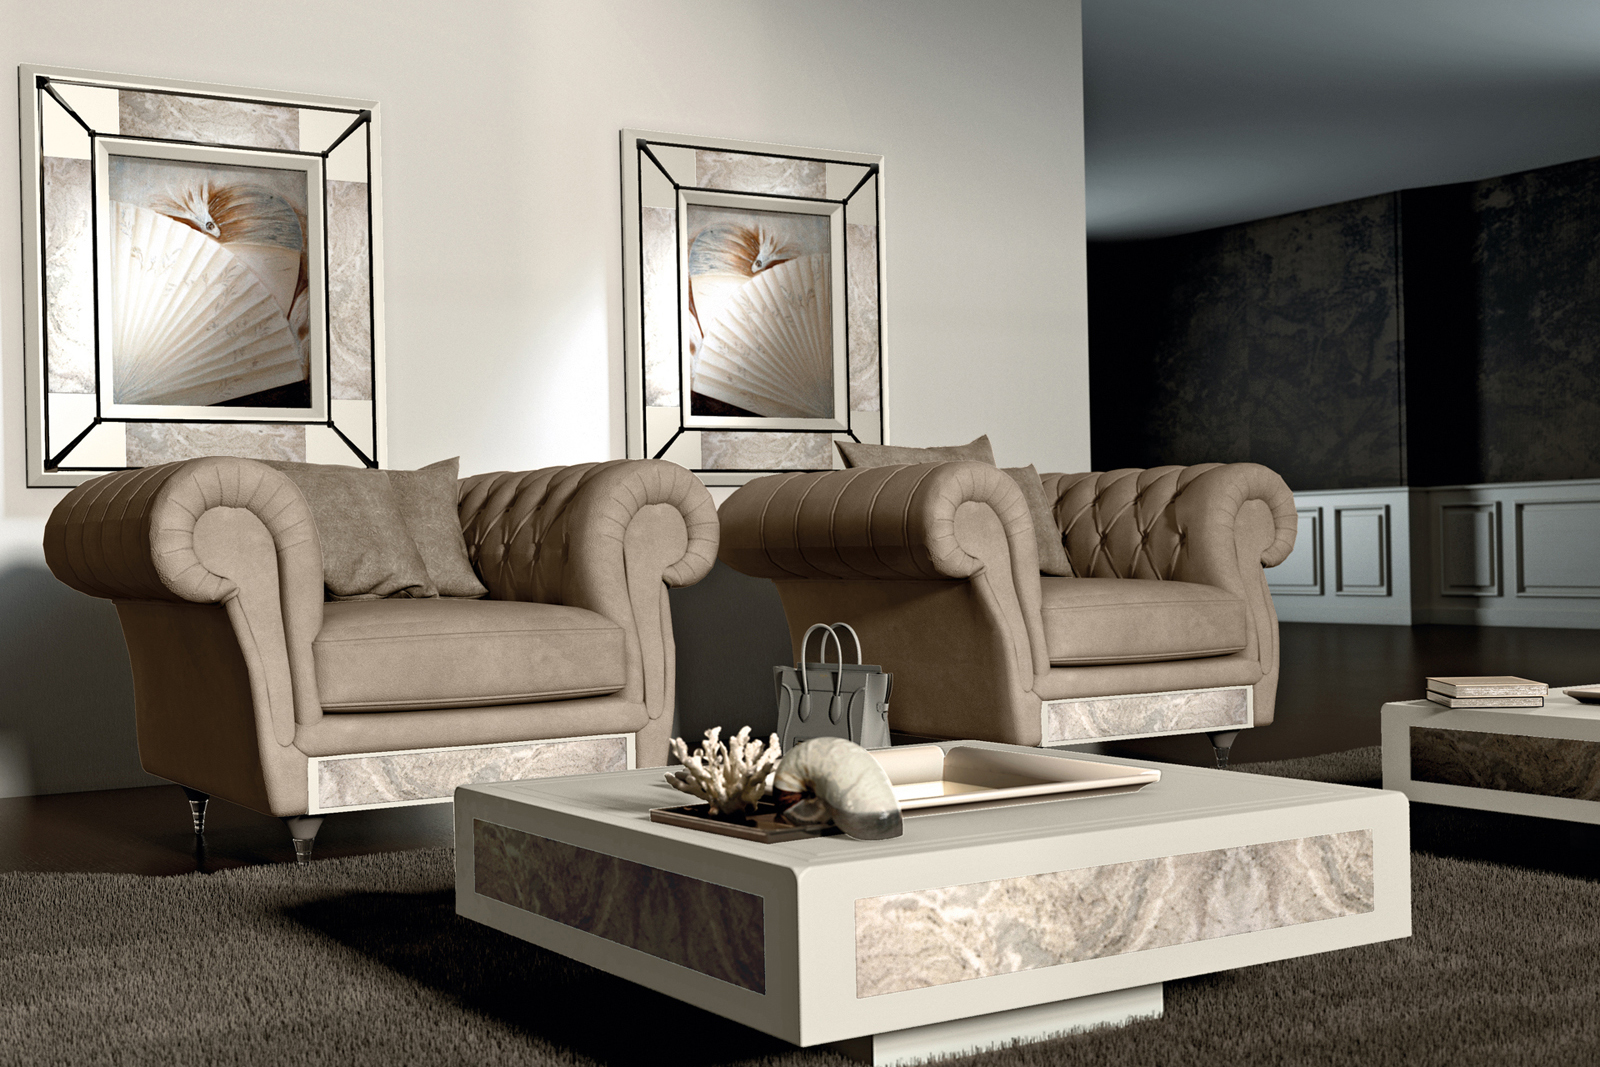 Luxury Living room accessories made in italy